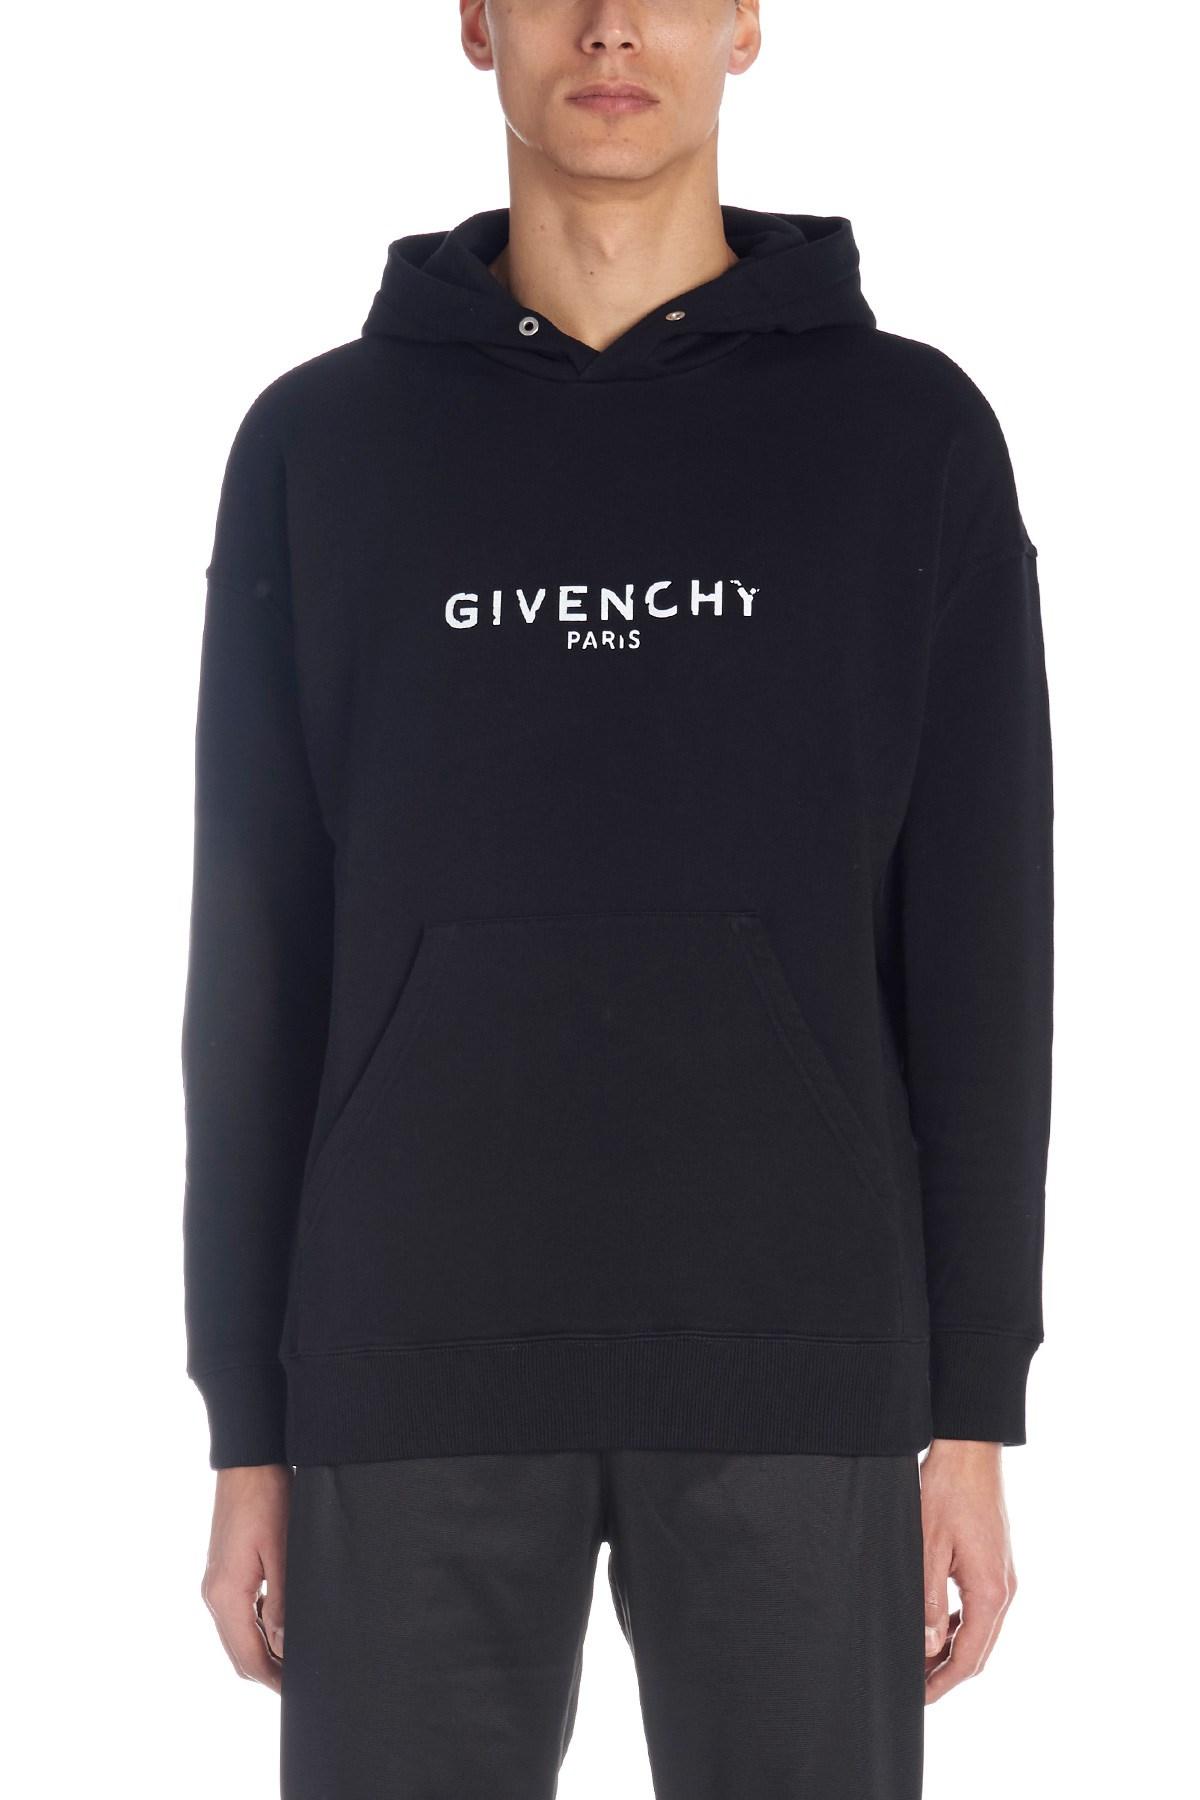 Givenchy Cotton 'destroyed Logo' Hoodie in Blue for Men - Lyst